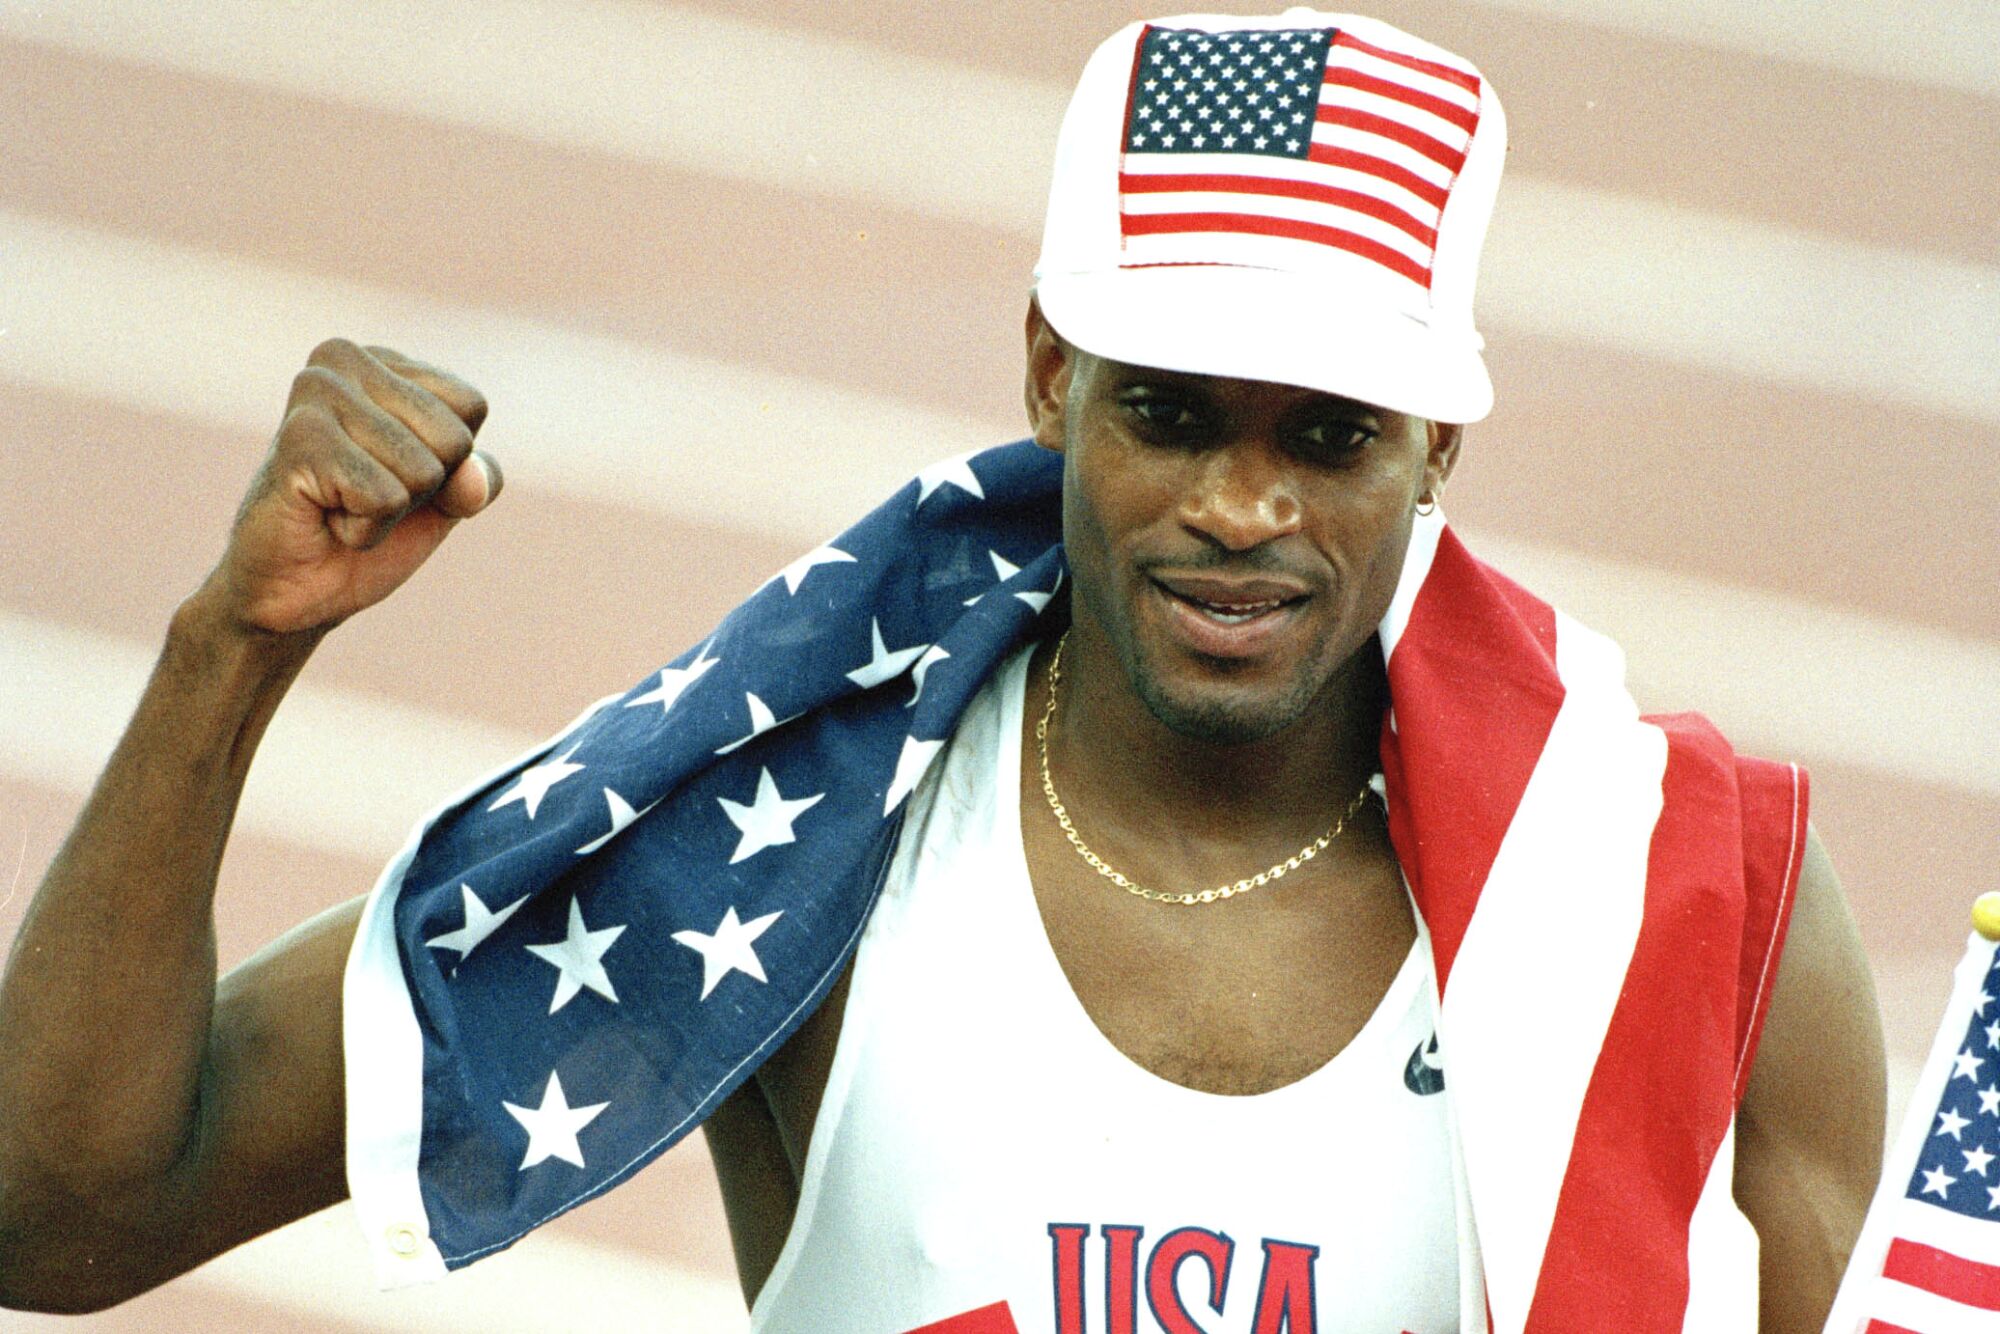 Kevin Young celebrates after winning gold in the men's 400-meter hurdles at the 1992 Barcelona Olympic Games.